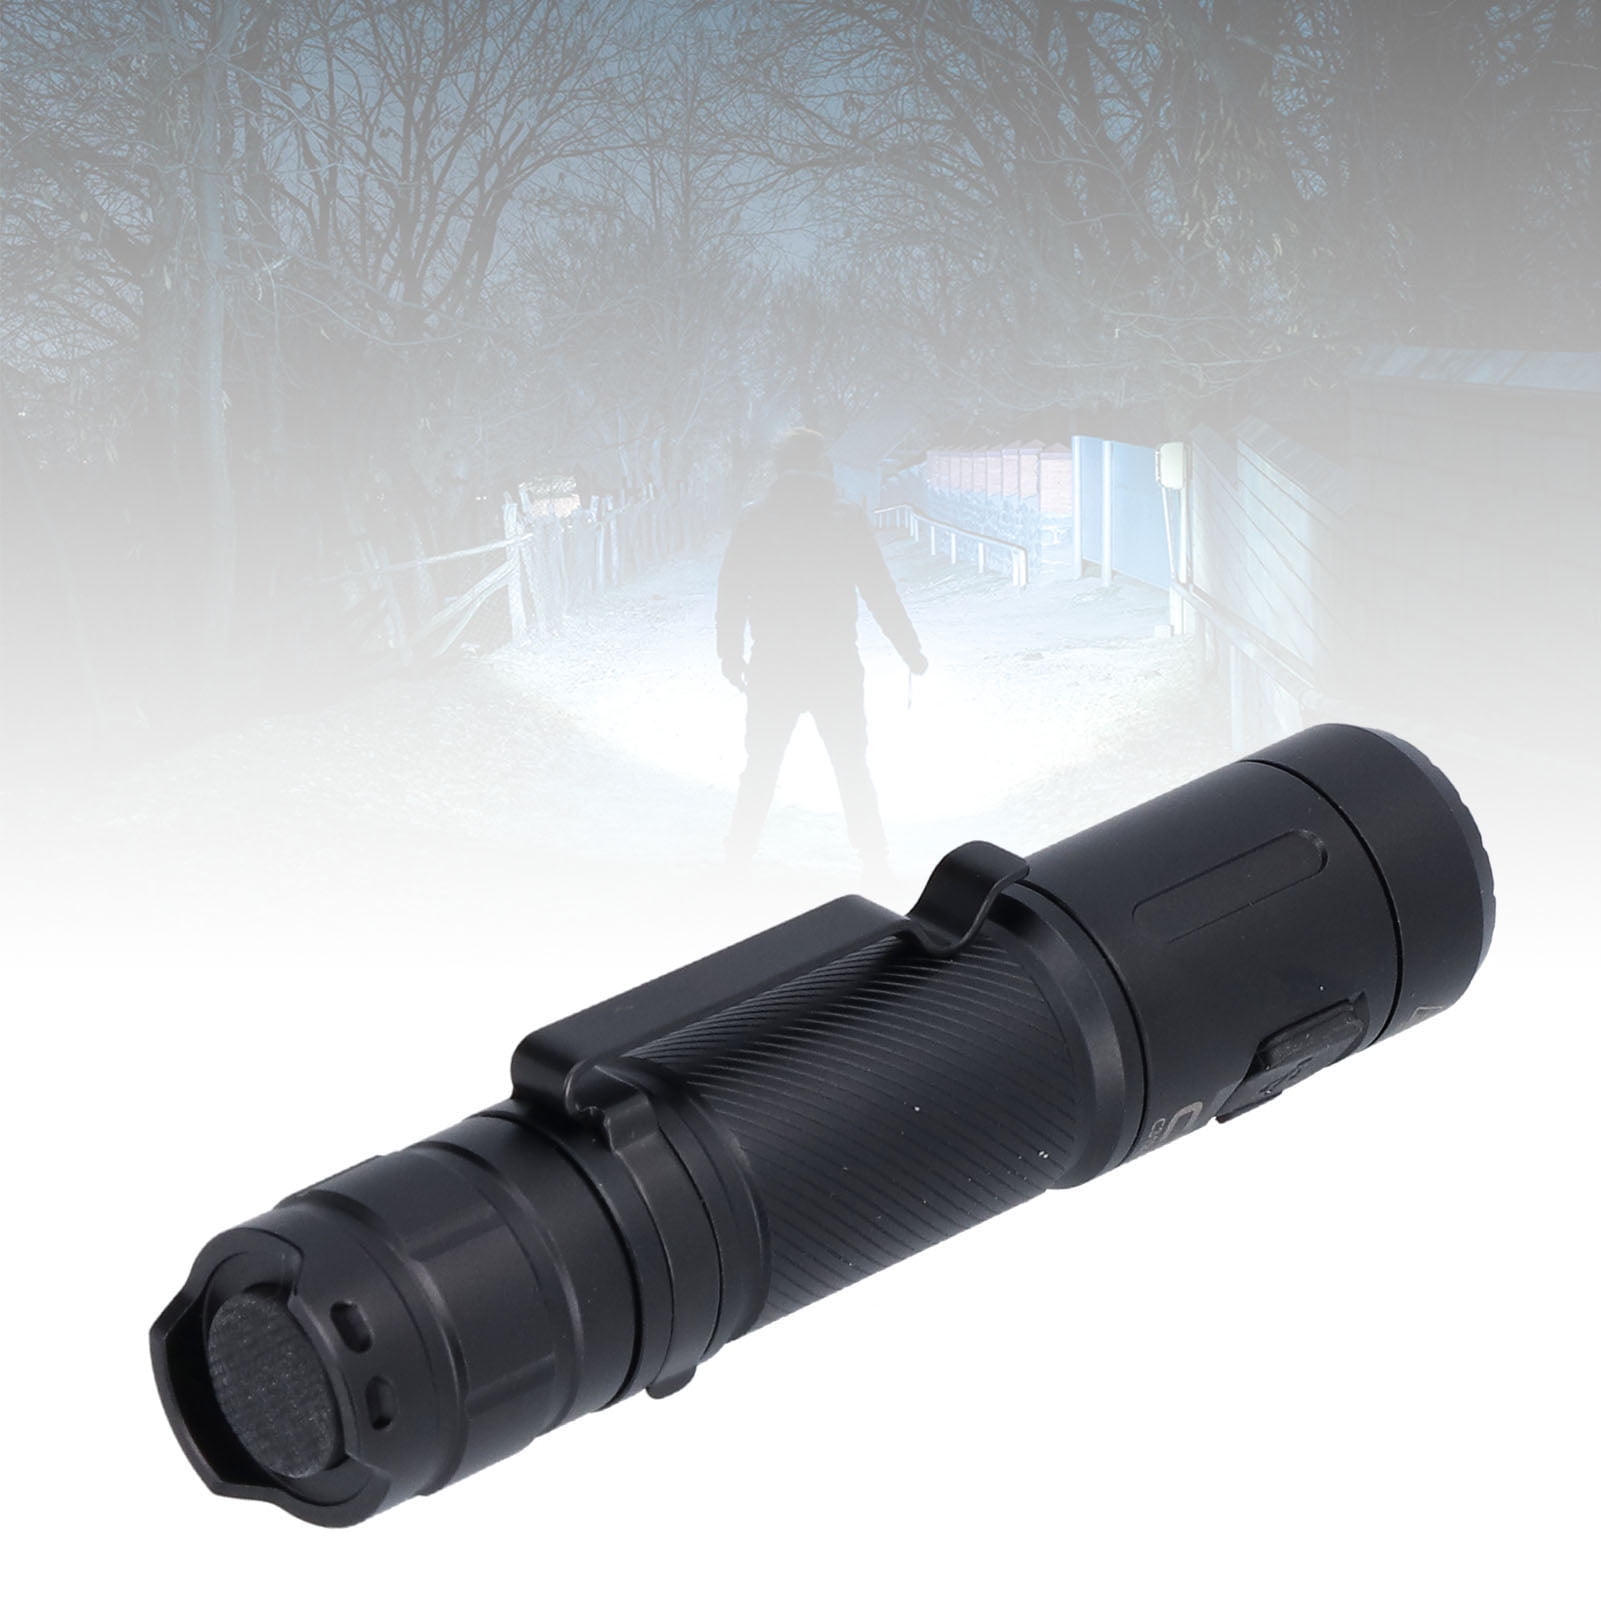 2PCS 200000 Lumens Tactical T6 Zoomable LED Flashlight Torch Lamp Light Outdoor 